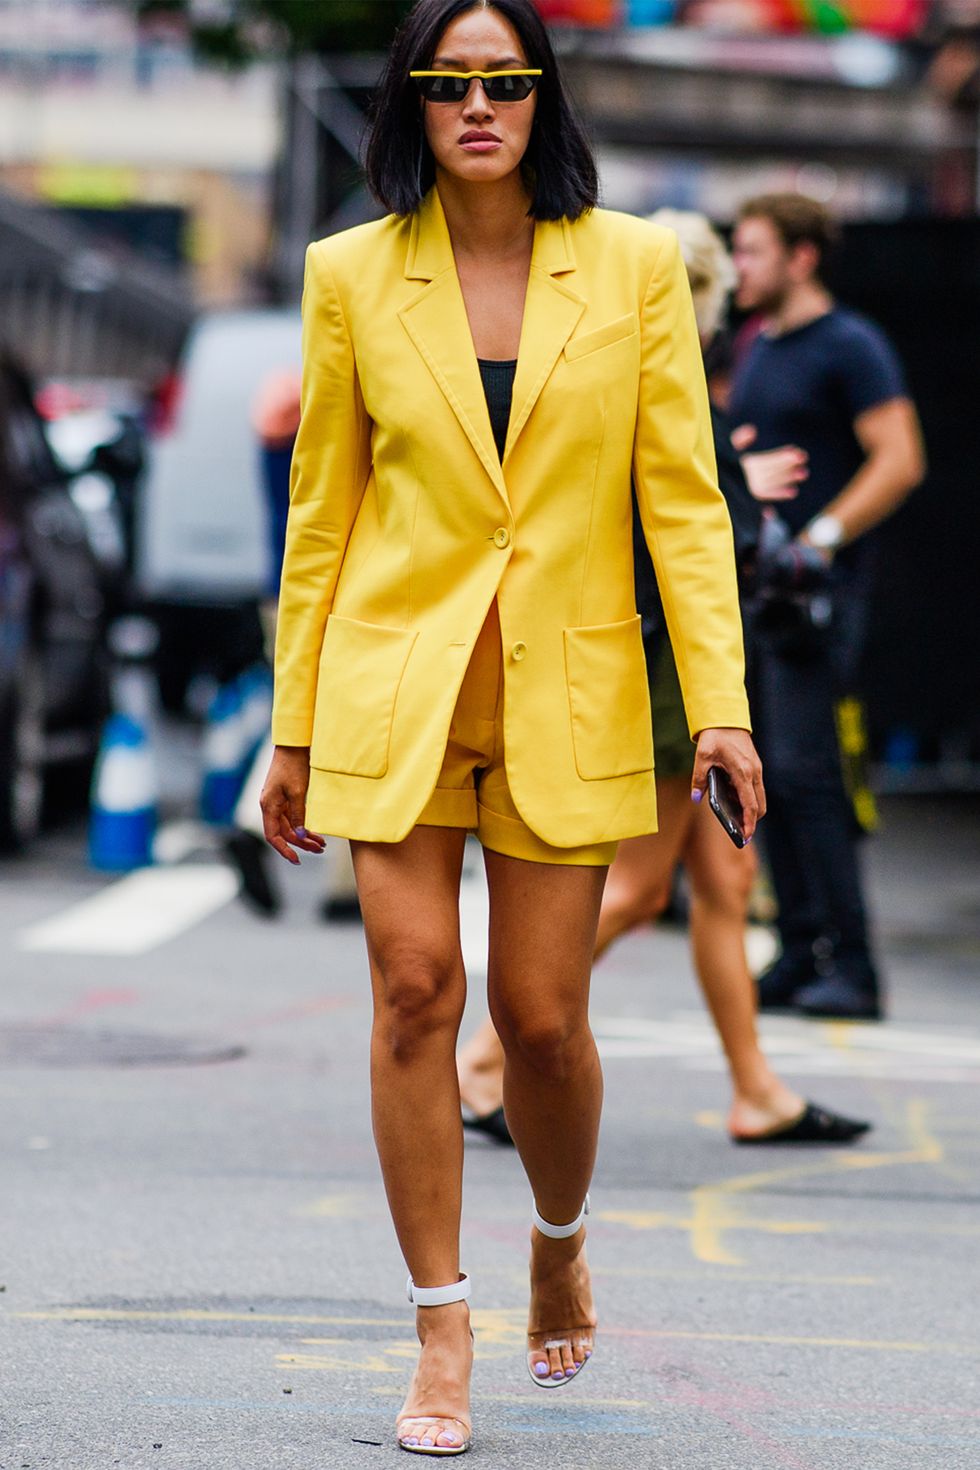 Cute Summer Outfit Ideas for 2019 - 9 New Ways To Rethink Your Summer Style